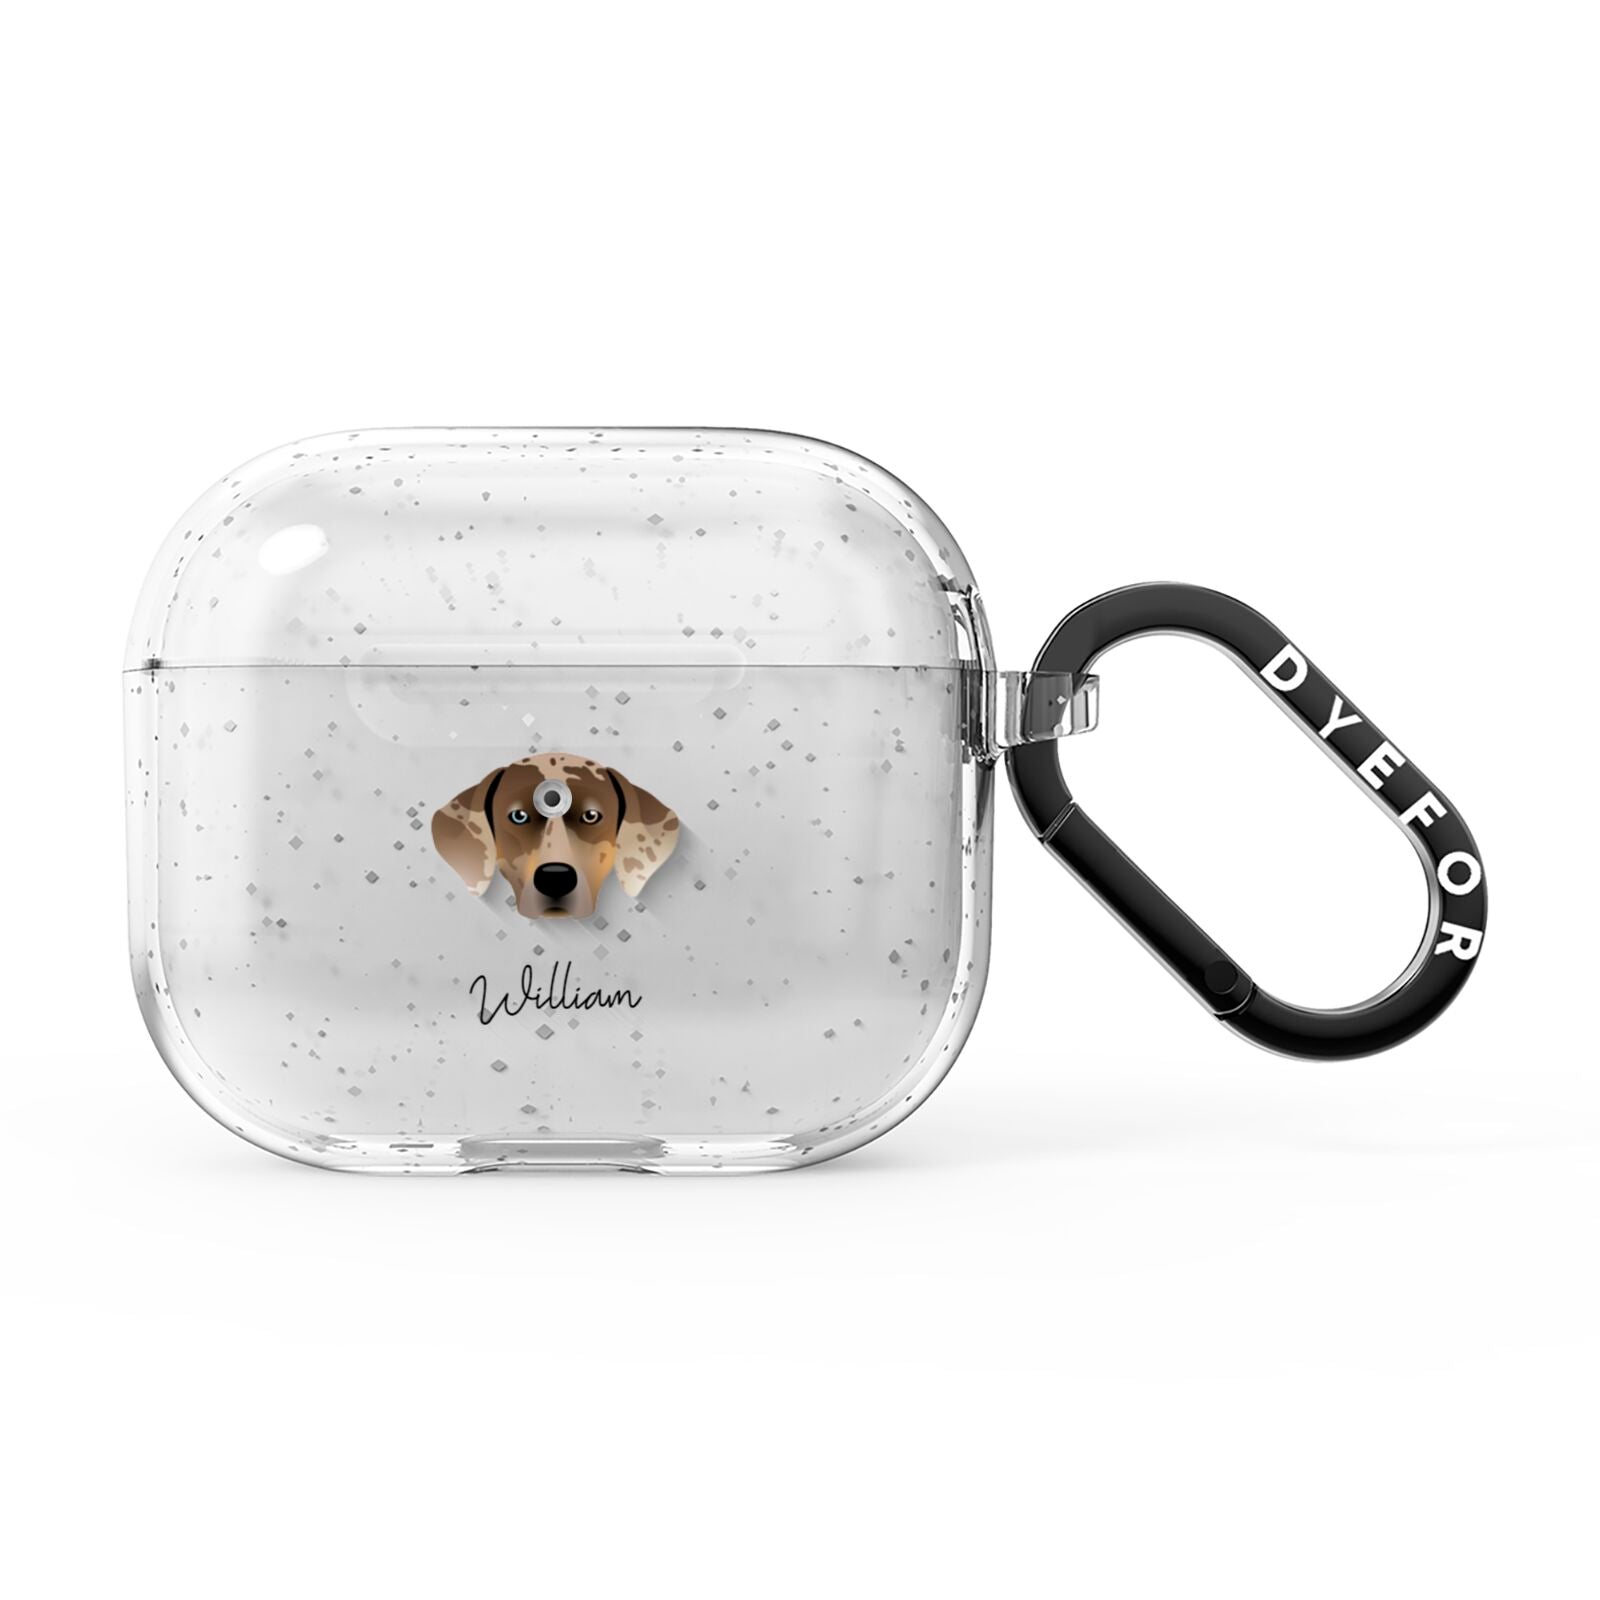 Catahoula Leopard Dog Personalised AirPods Glitter Case 3rd Gen